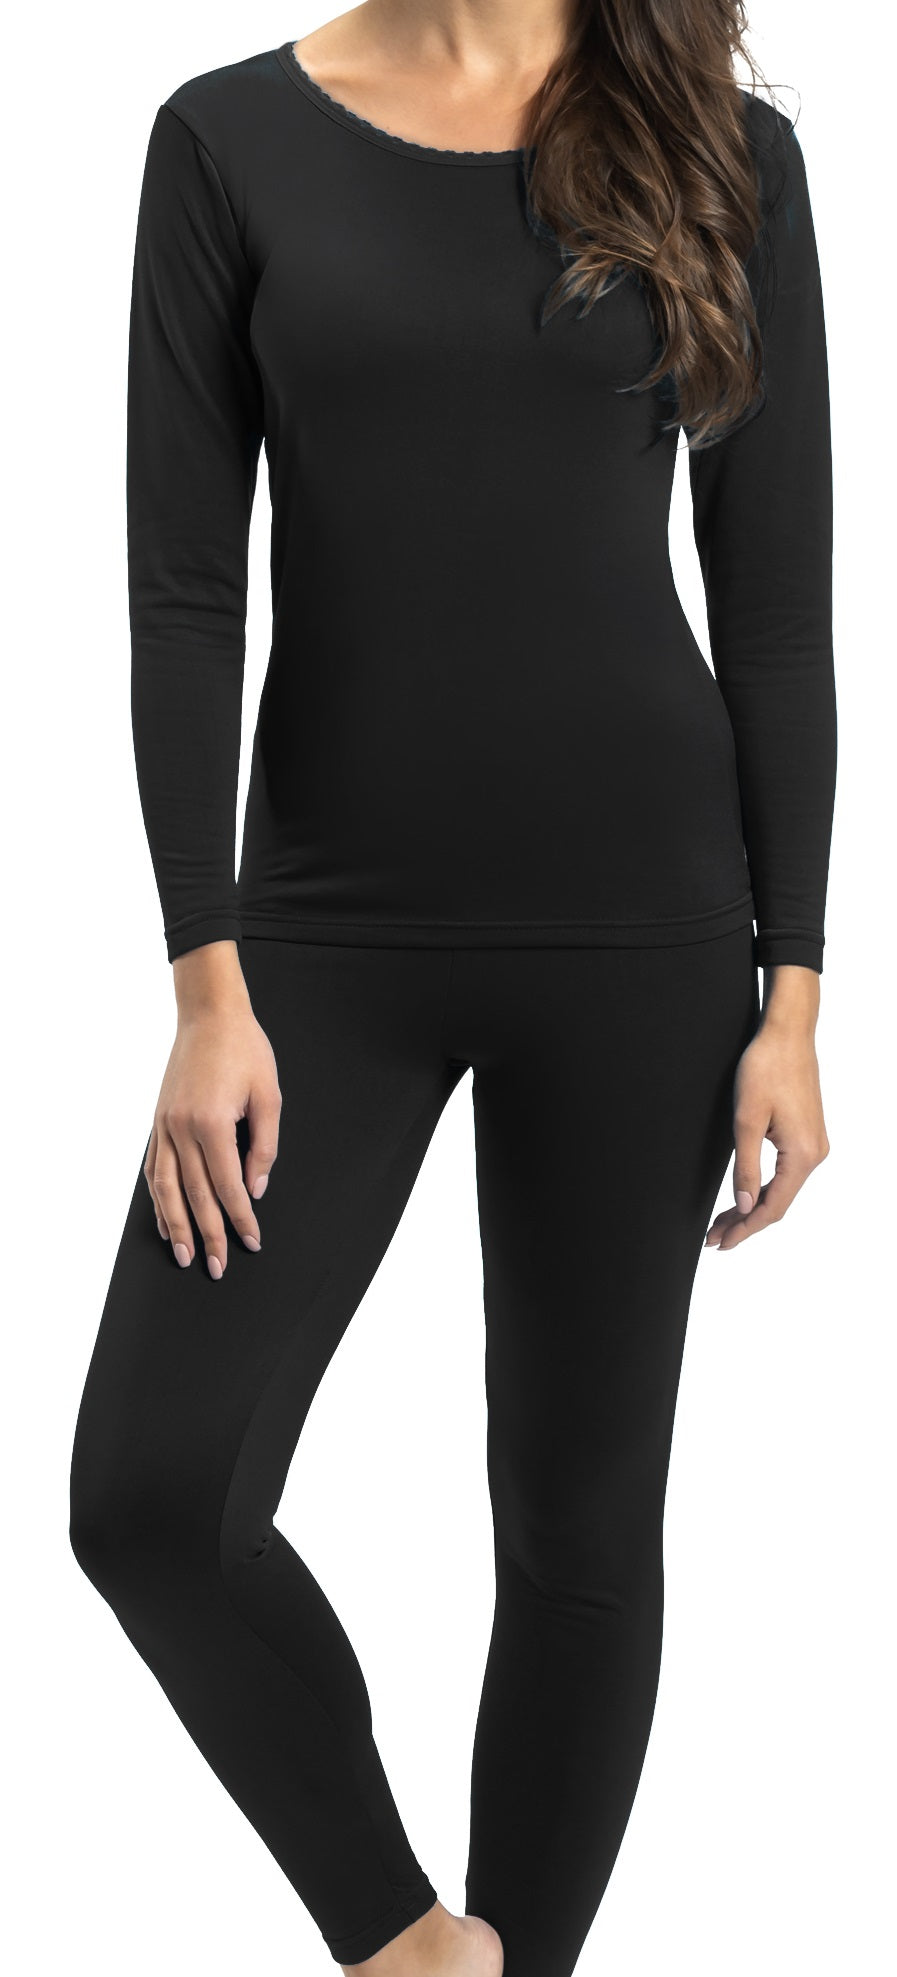 Rocky Thermal Underwear for Women, Heavyweight and Midweight (Thermal Long  Johns Set) Shirt & Pants, Grey (Standard Weight), X-Large price in UAE,  UAE